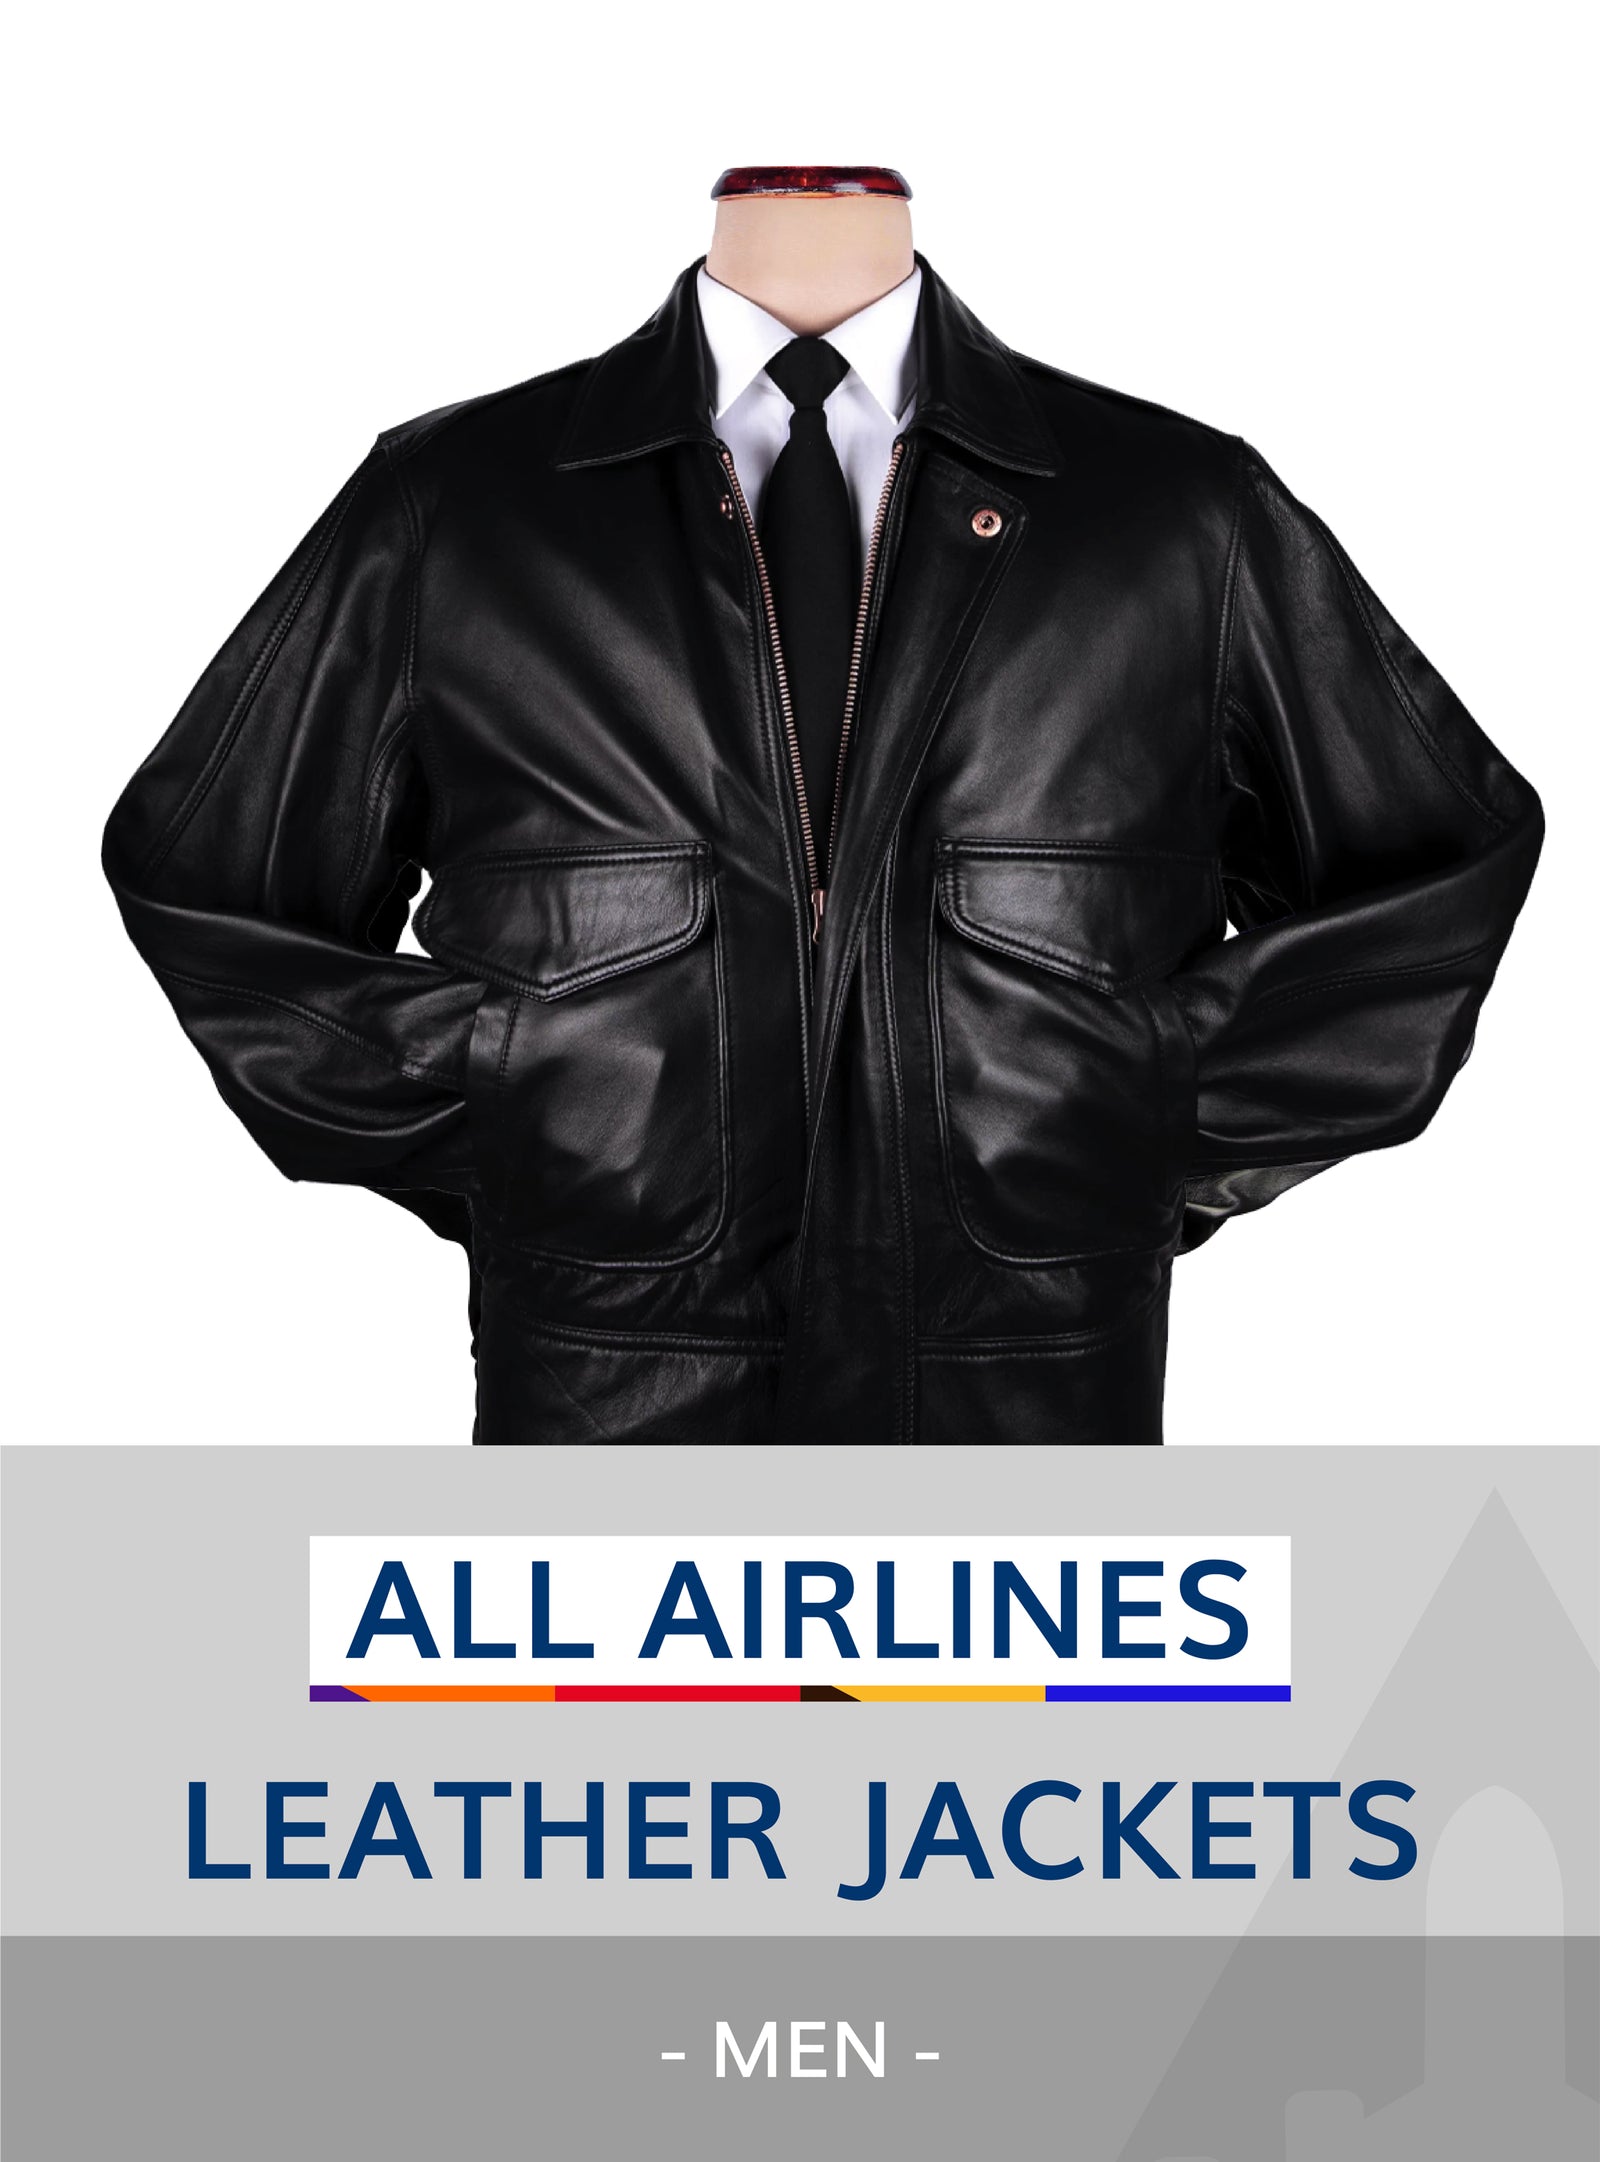 All Airlines leather jacket for men